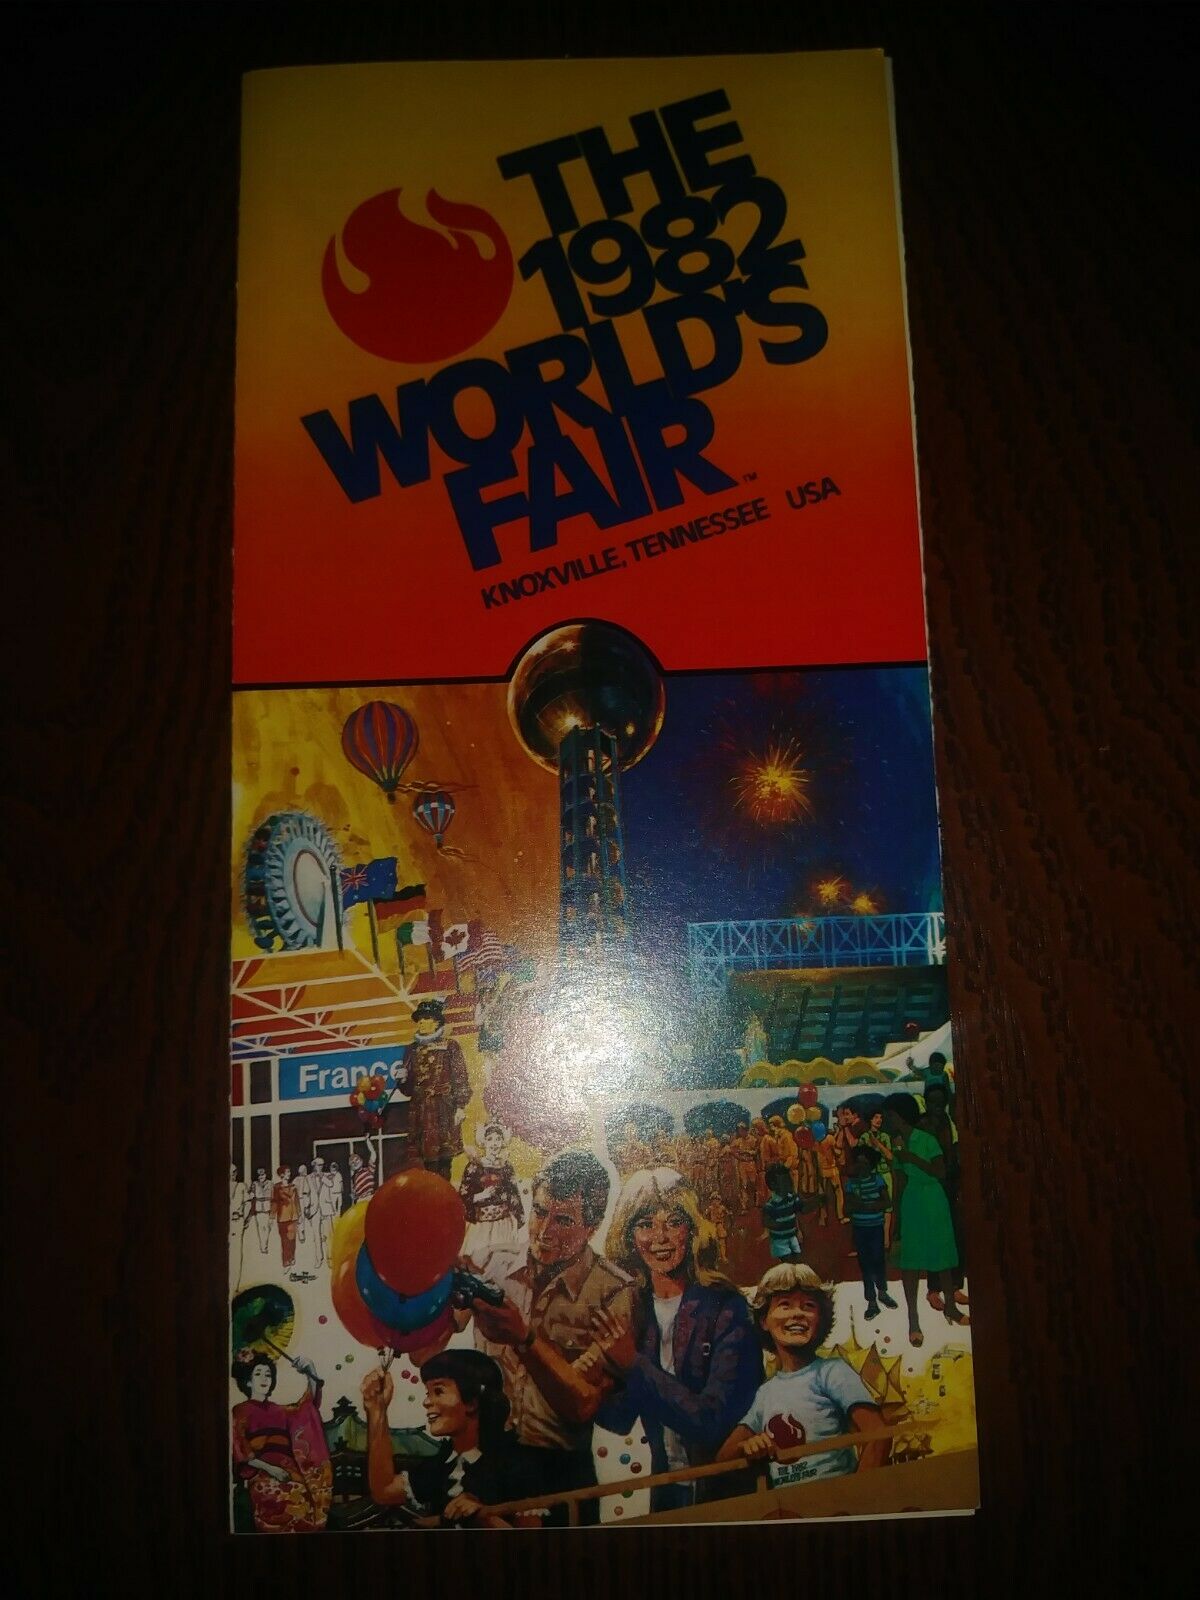 1982 World's Fair Knoxville Tennessee Brochure